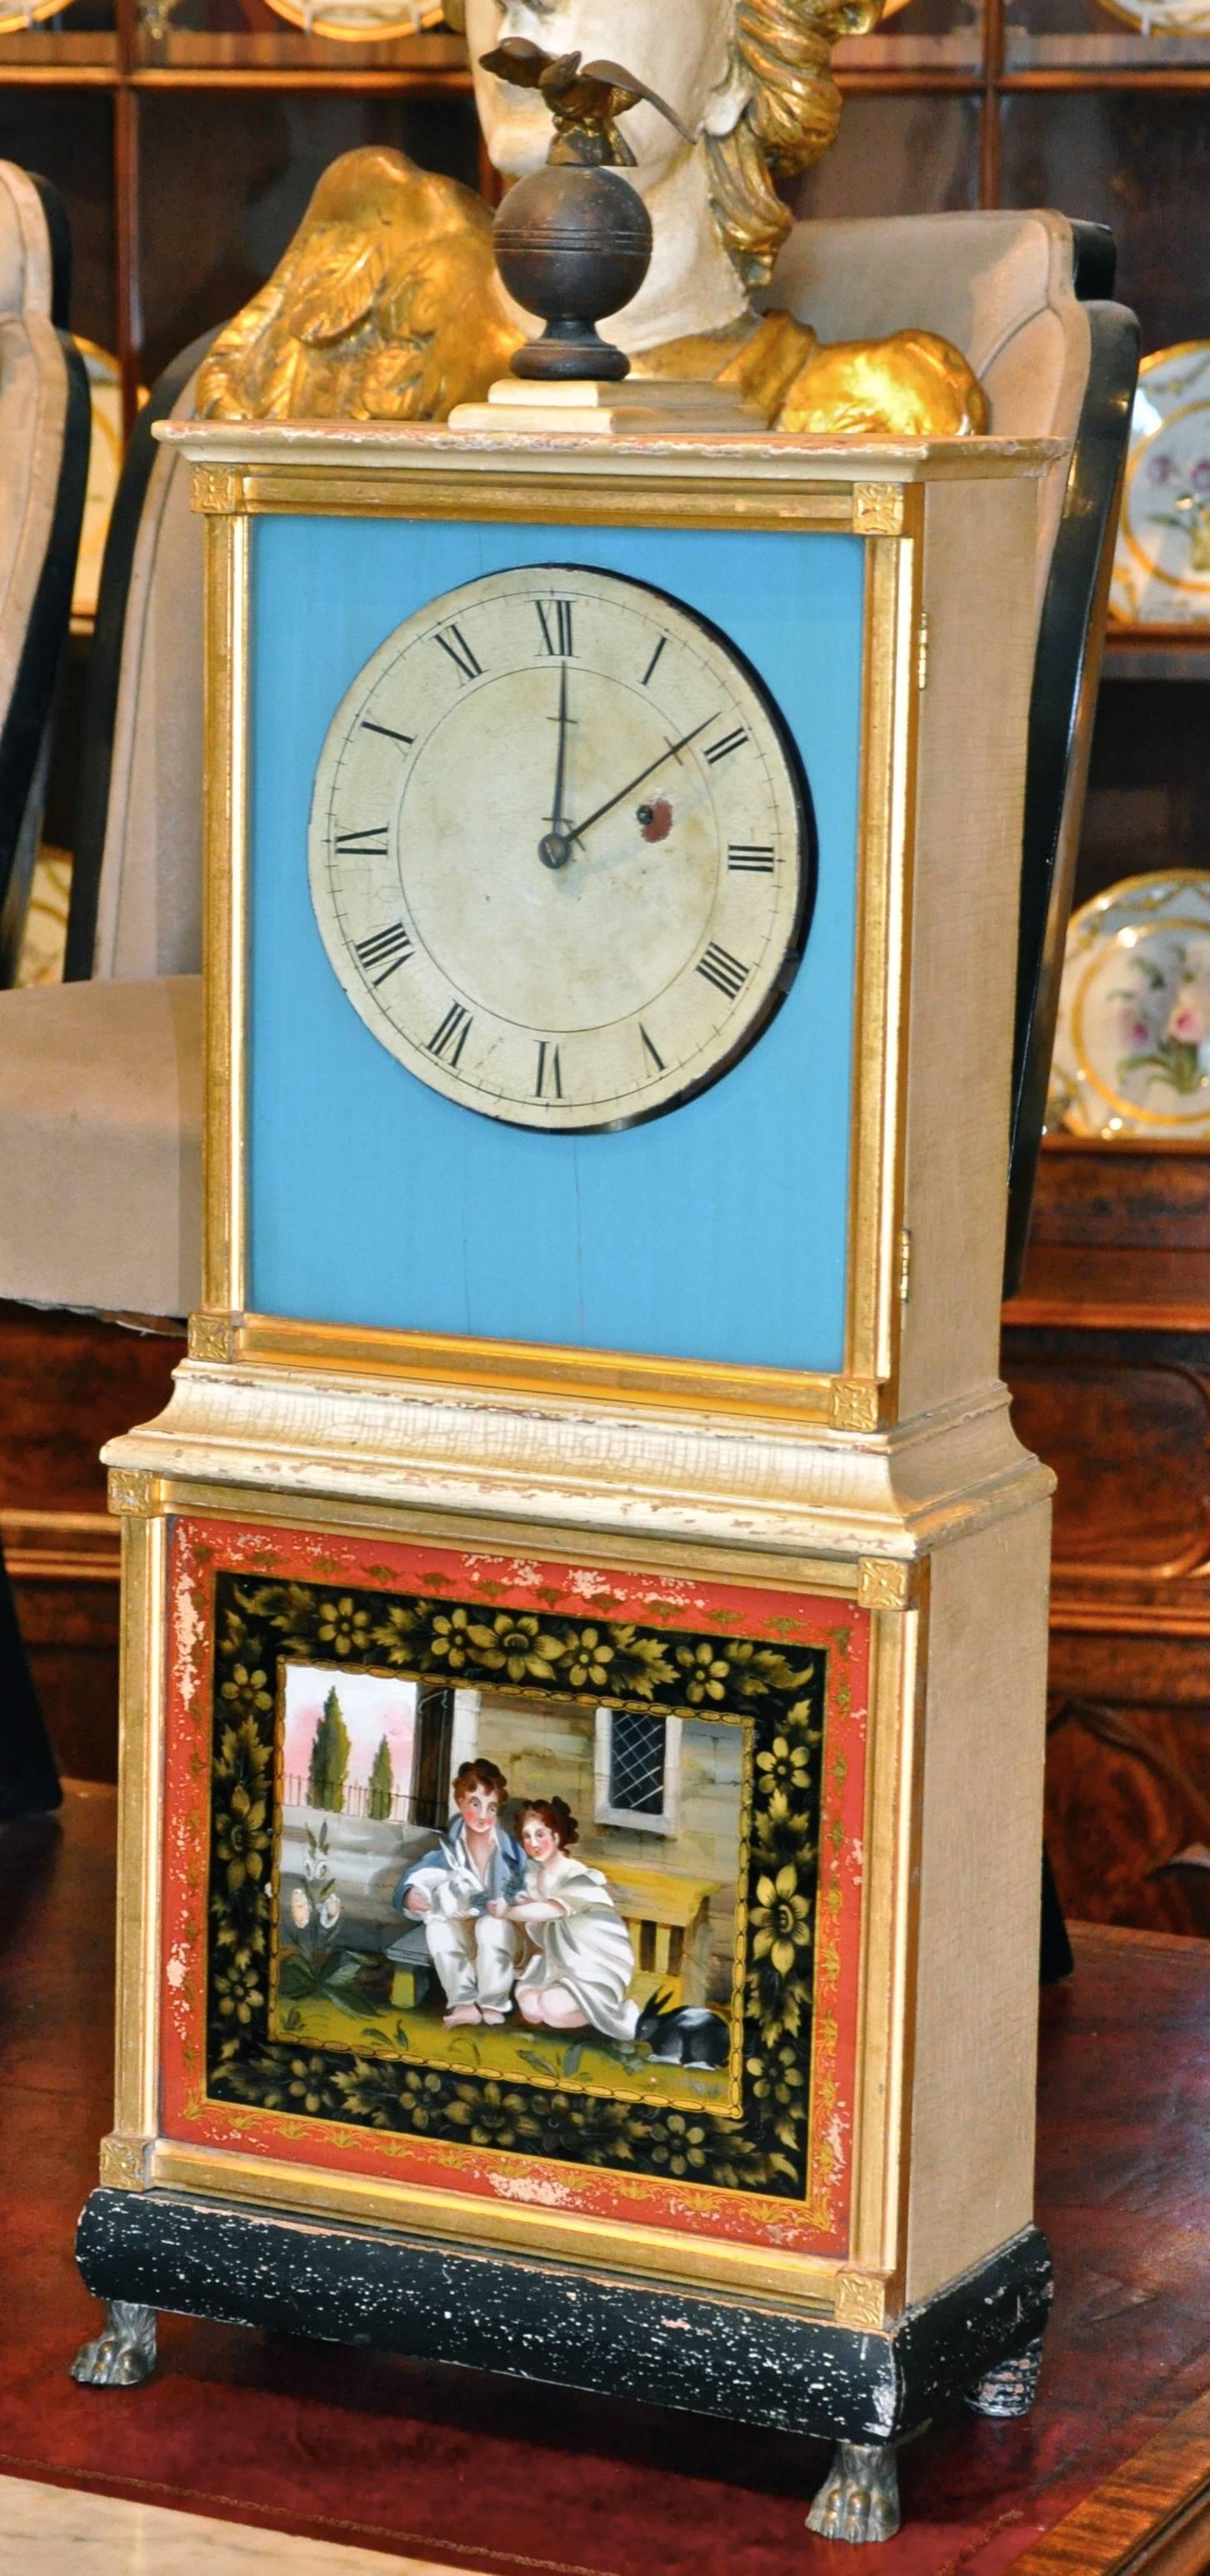 Rare Aaron Willard Federal églomisé bride's clock.

The attractive shelf clocks of this form were popularized at the turn of the 19th century in coastal Massachusetts and are subsequently referred to as “Massachusetts shelf clocks”. This highly